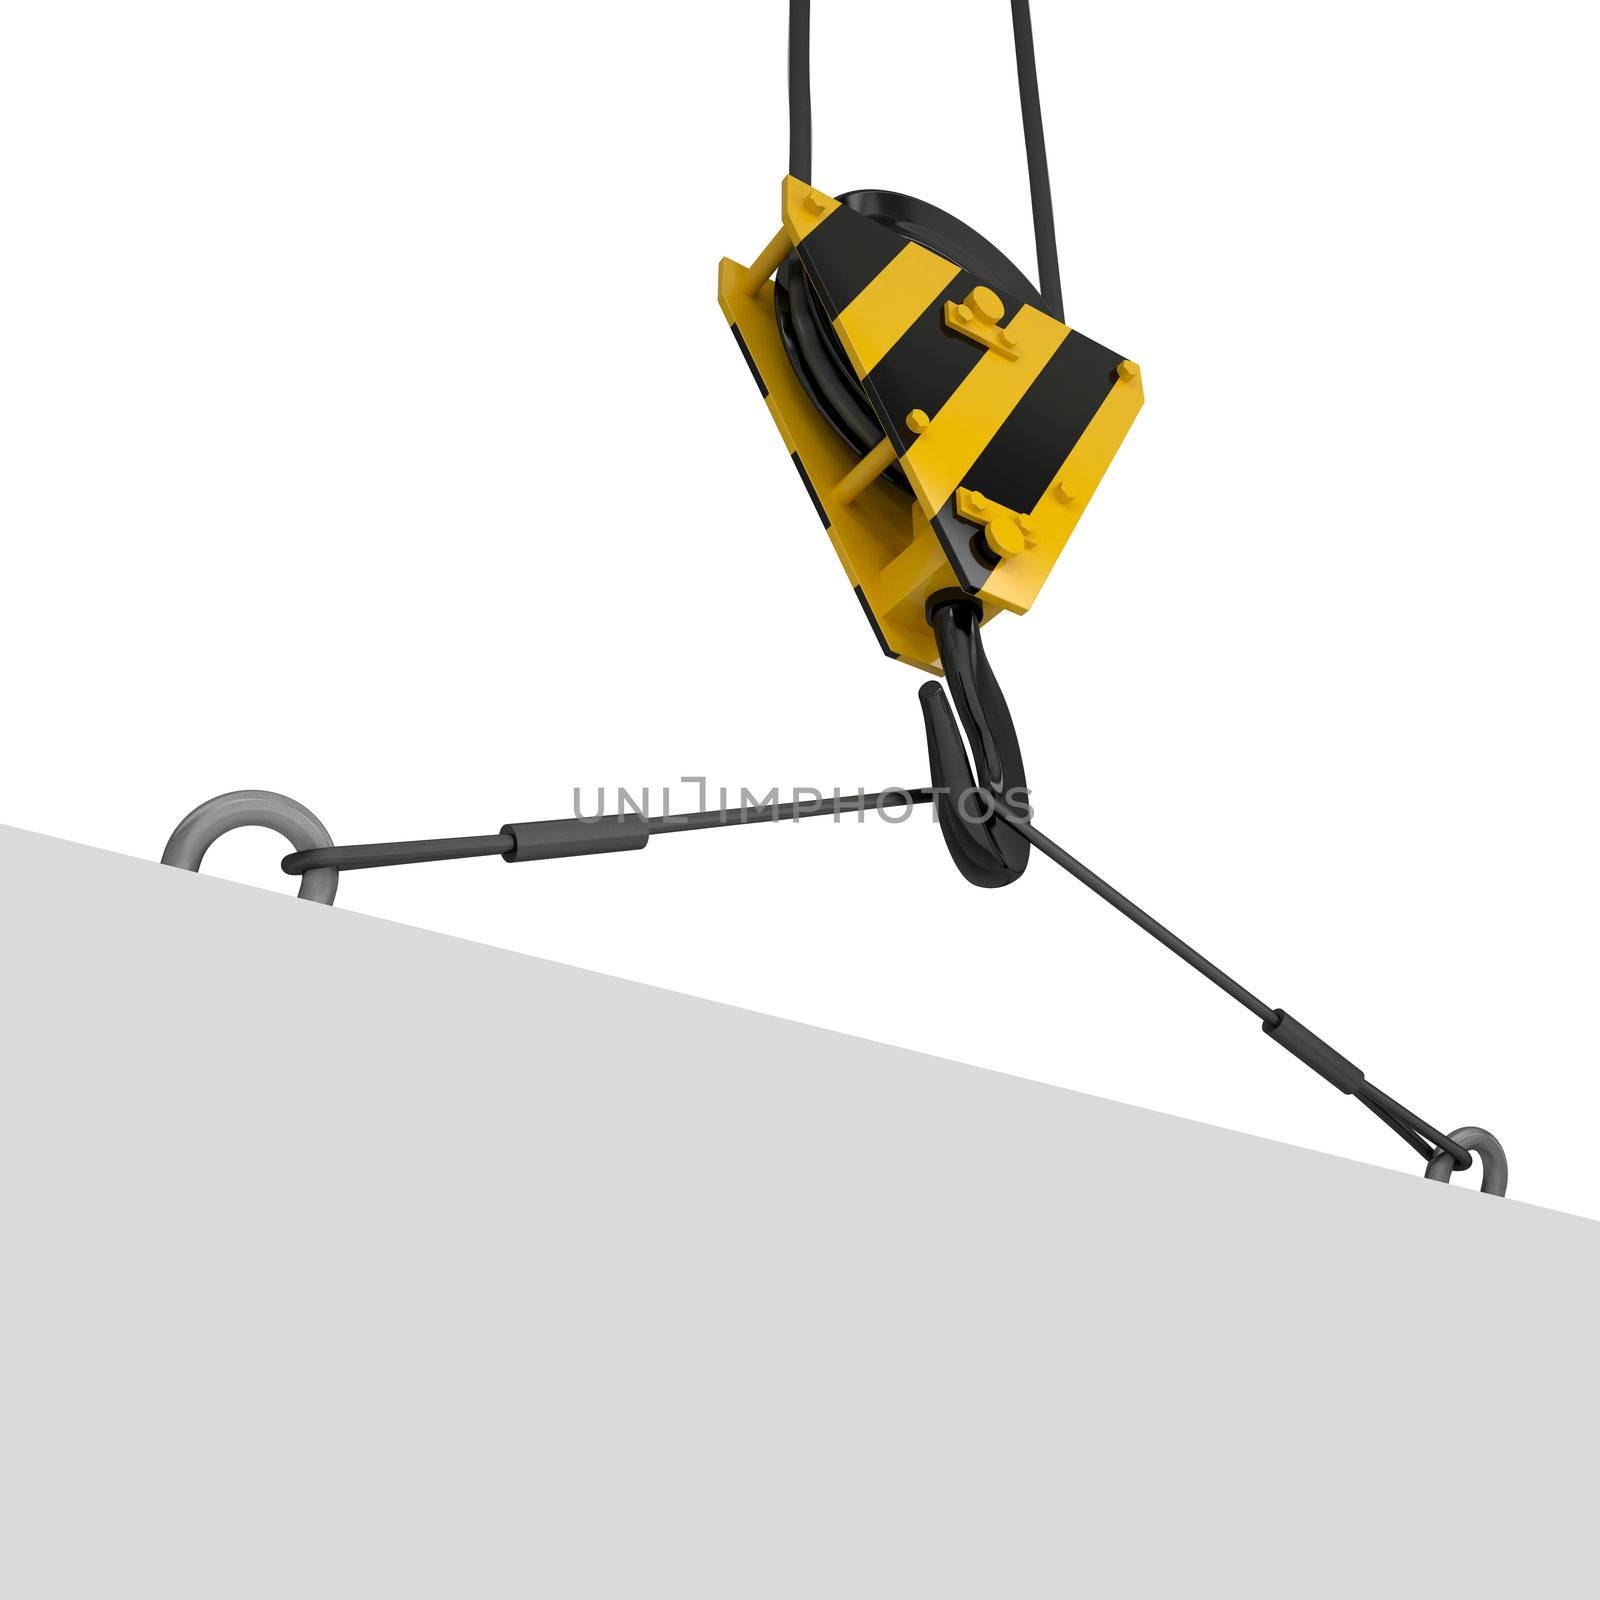 Crane hook lifts the white plate. Isolated render on a white background